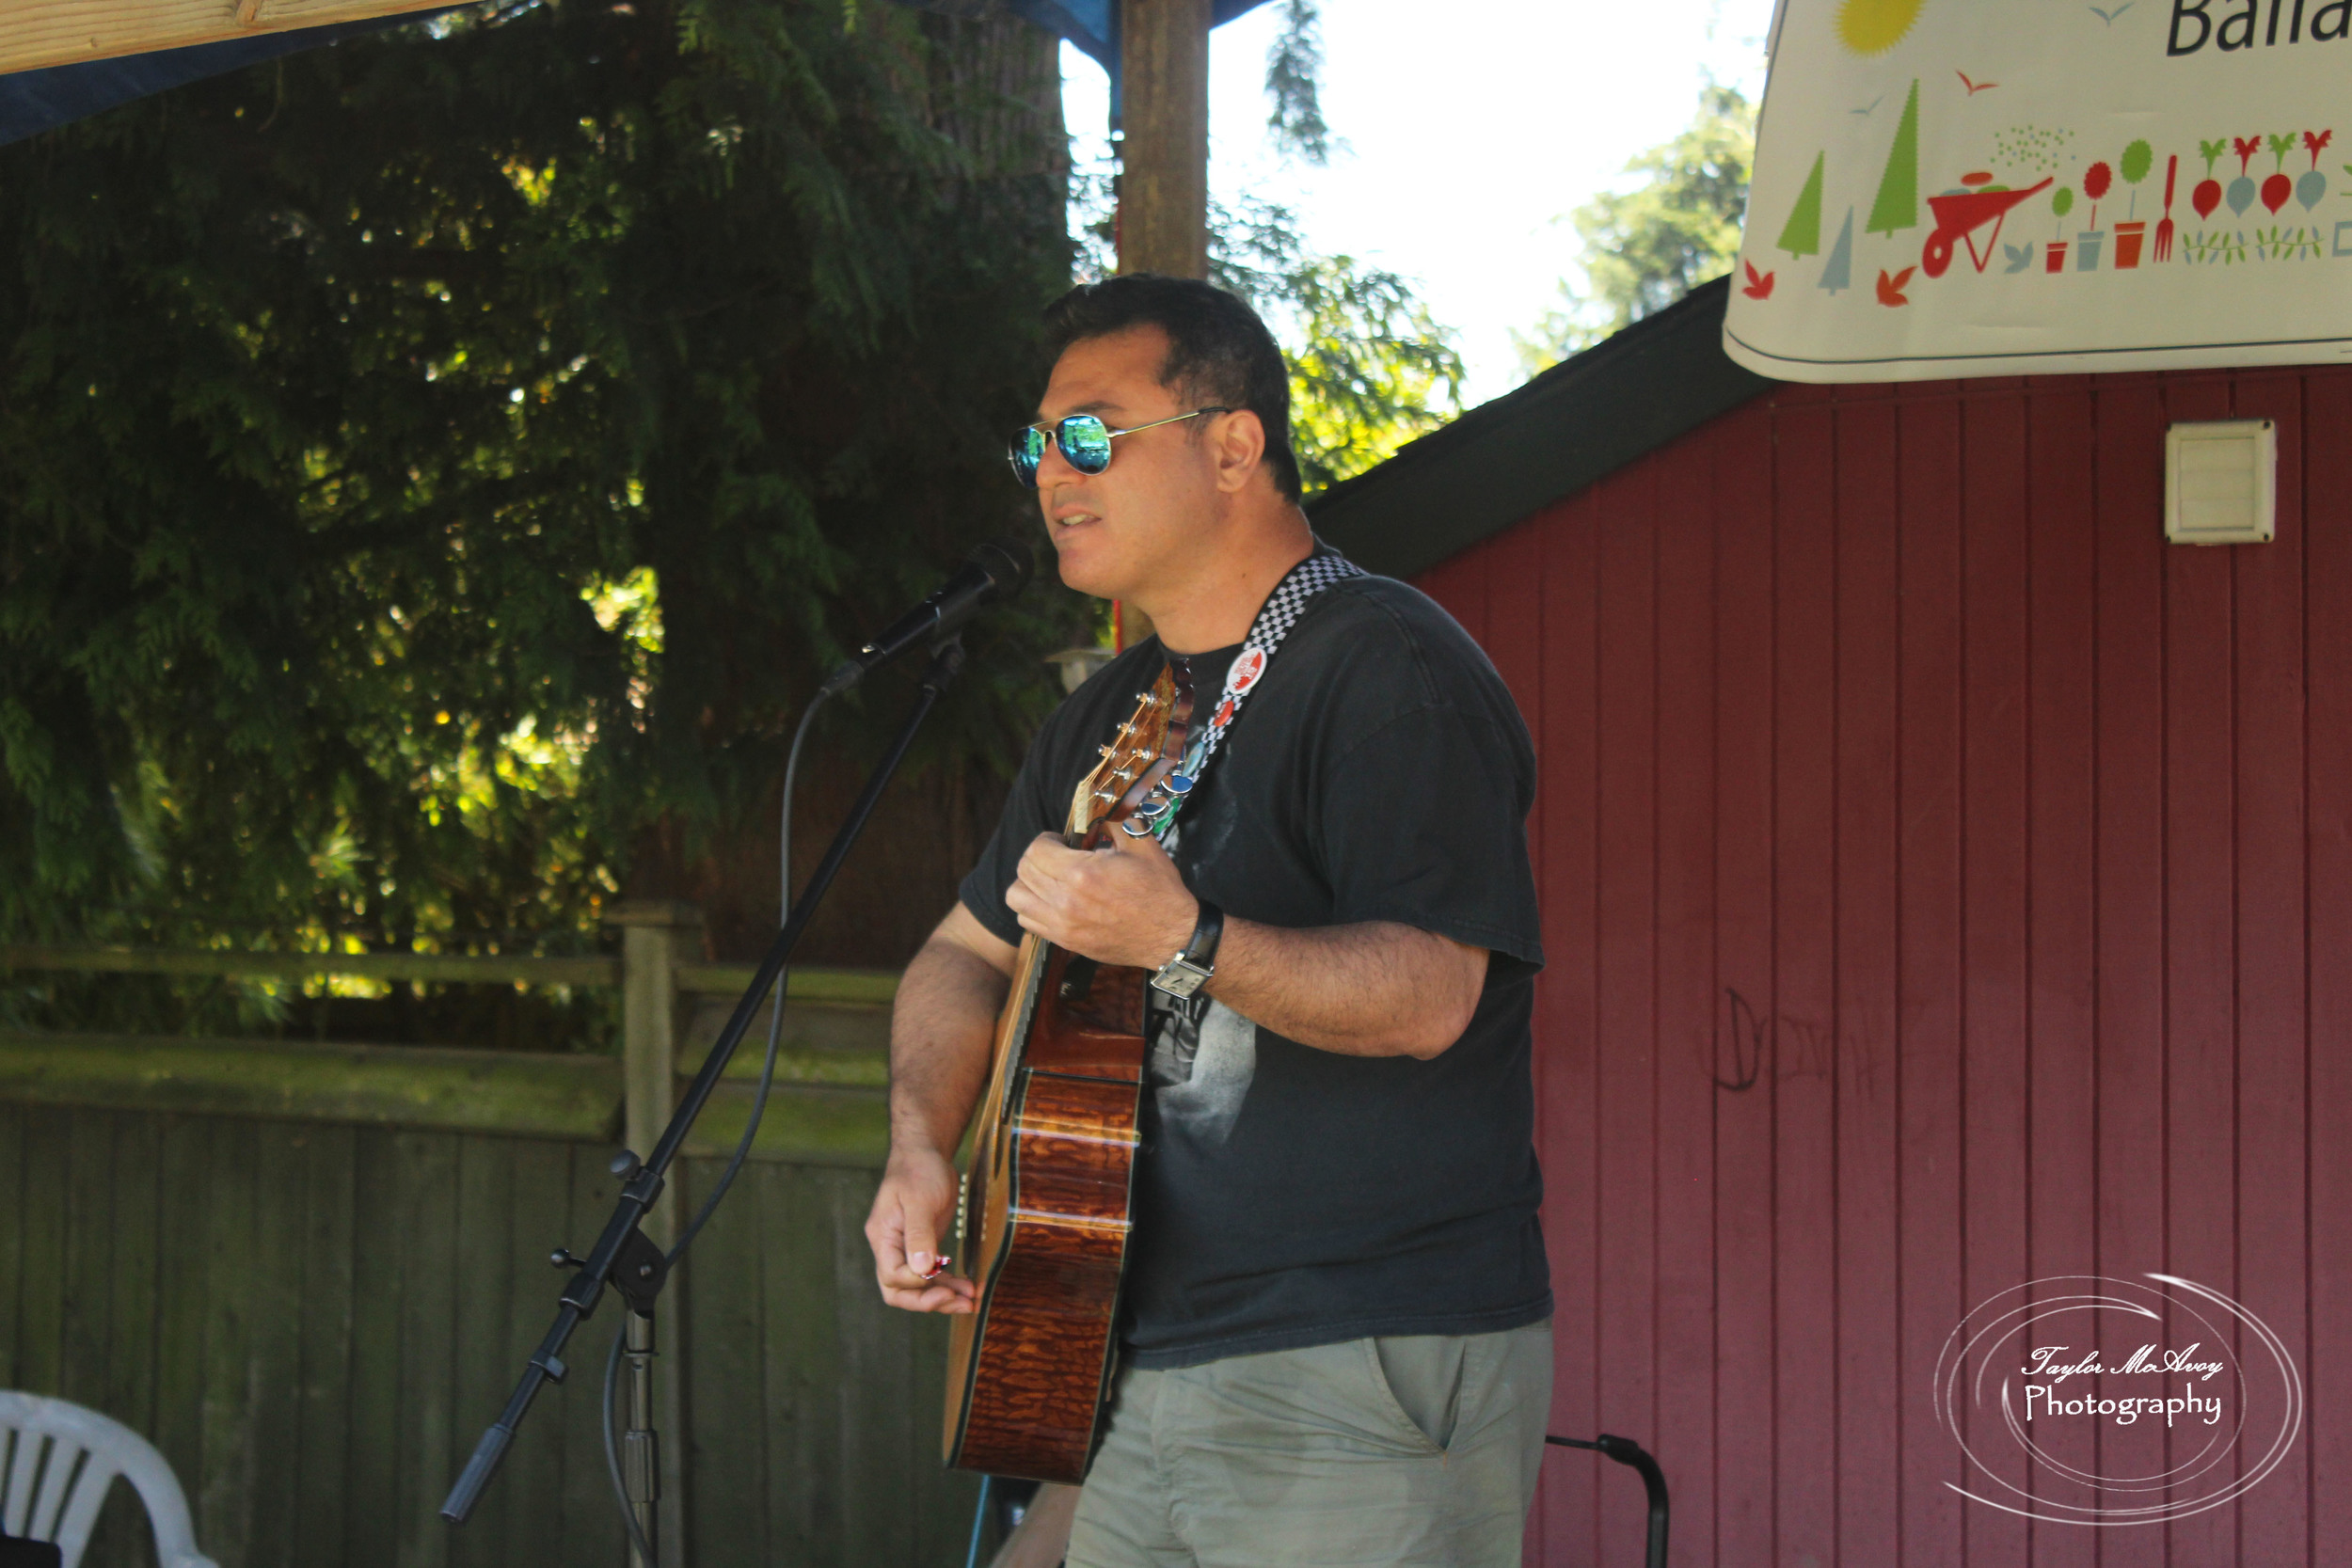  Musician Ben Henry performed at a small stage set in the gardens for community members to sit and enjoy or listen to while exploring.&nbsp; 